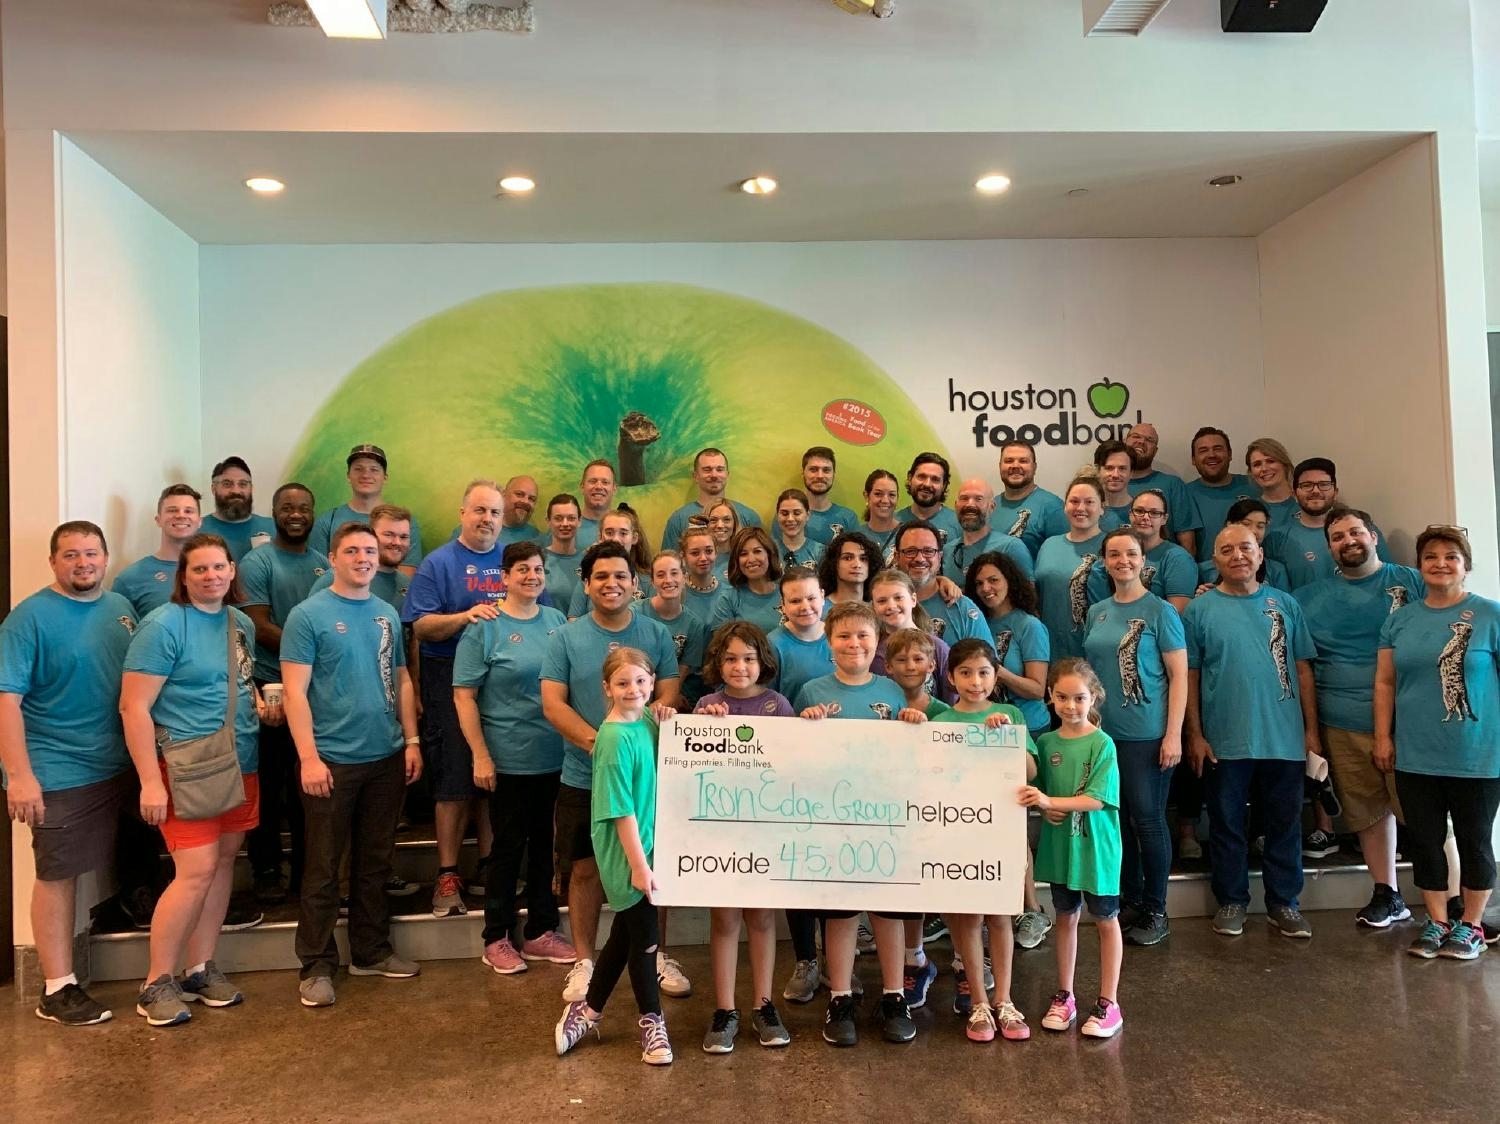 Volunteering at the Houston Food Bank is a rewarding tradition for the IronEdge team as we look for ways to give back.